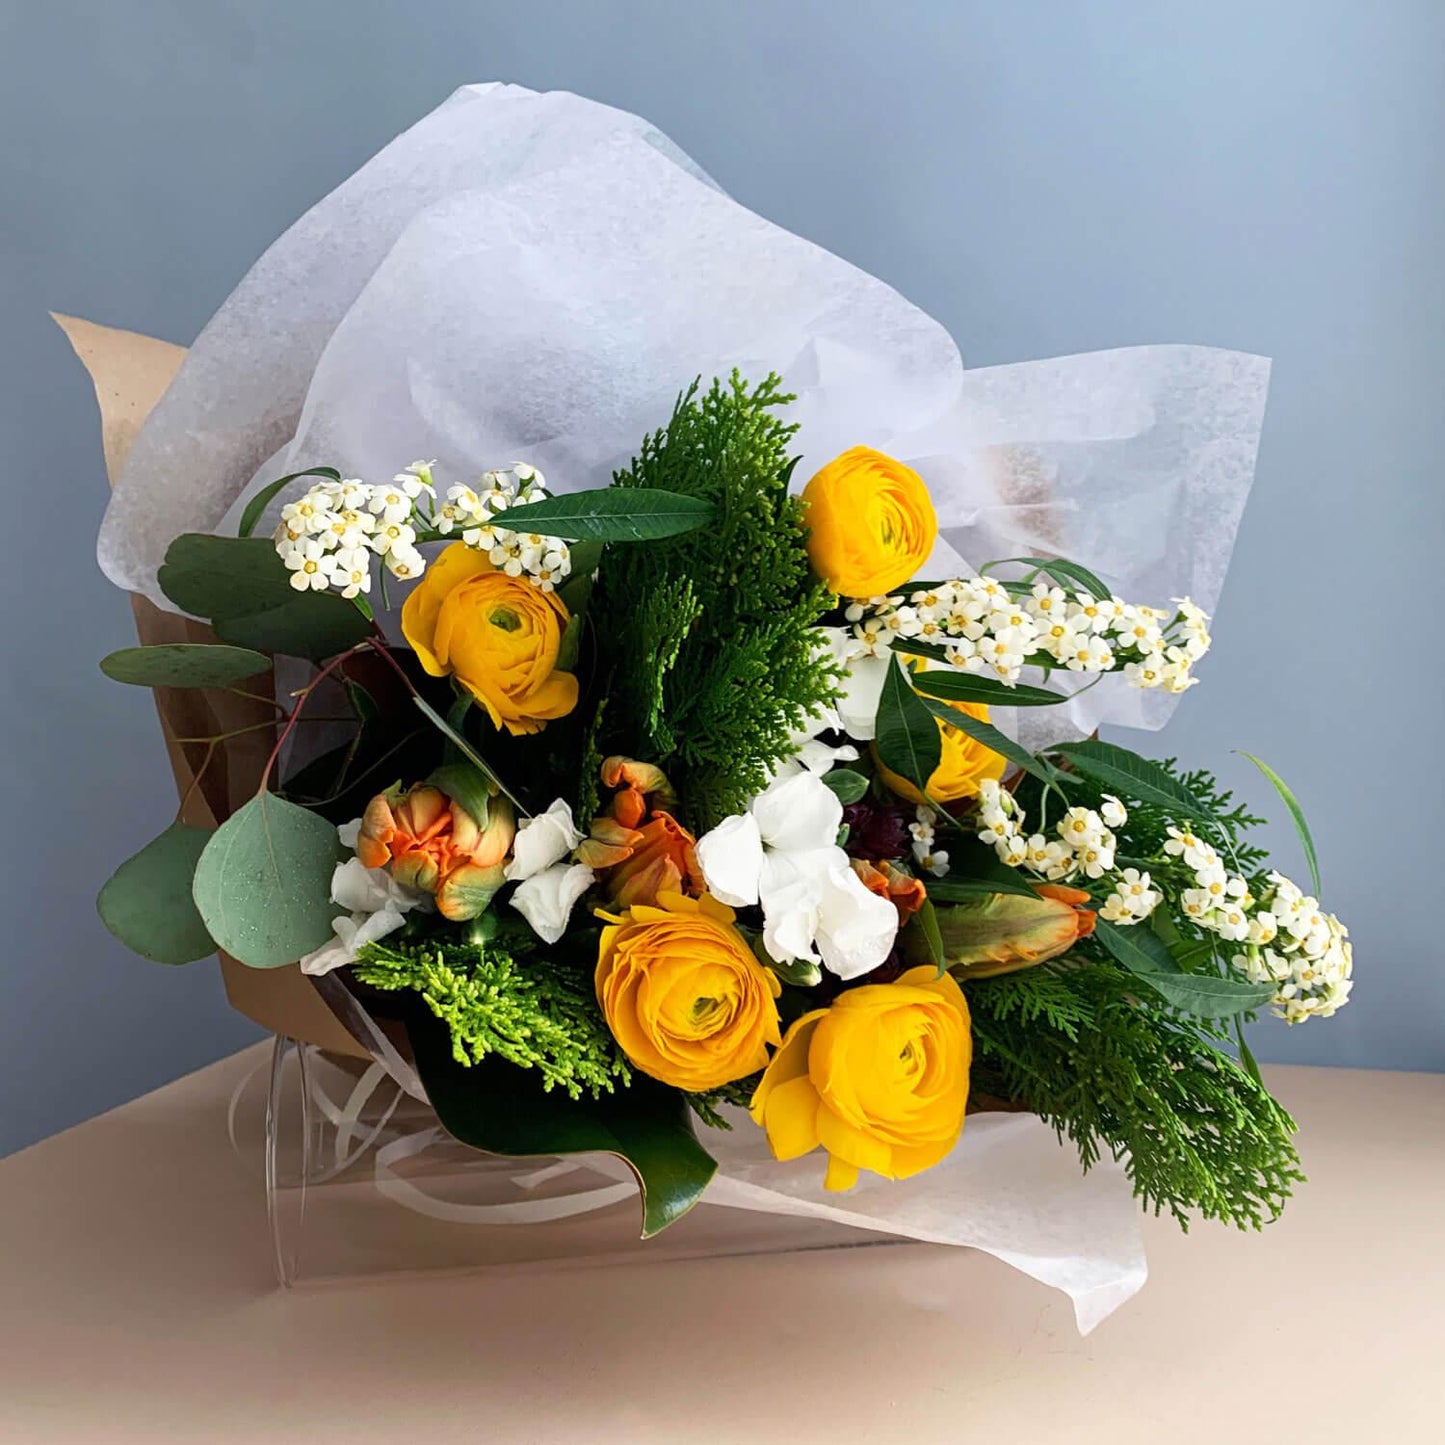 Wonderblooms monthly flower subscription from Quince Flowers, Toronto Florist and flower delivery - yellow white and green bouquet of flower with ranunculus and foliage. Order online for flower & plant subscriptions from the best florist in Toronto near you.